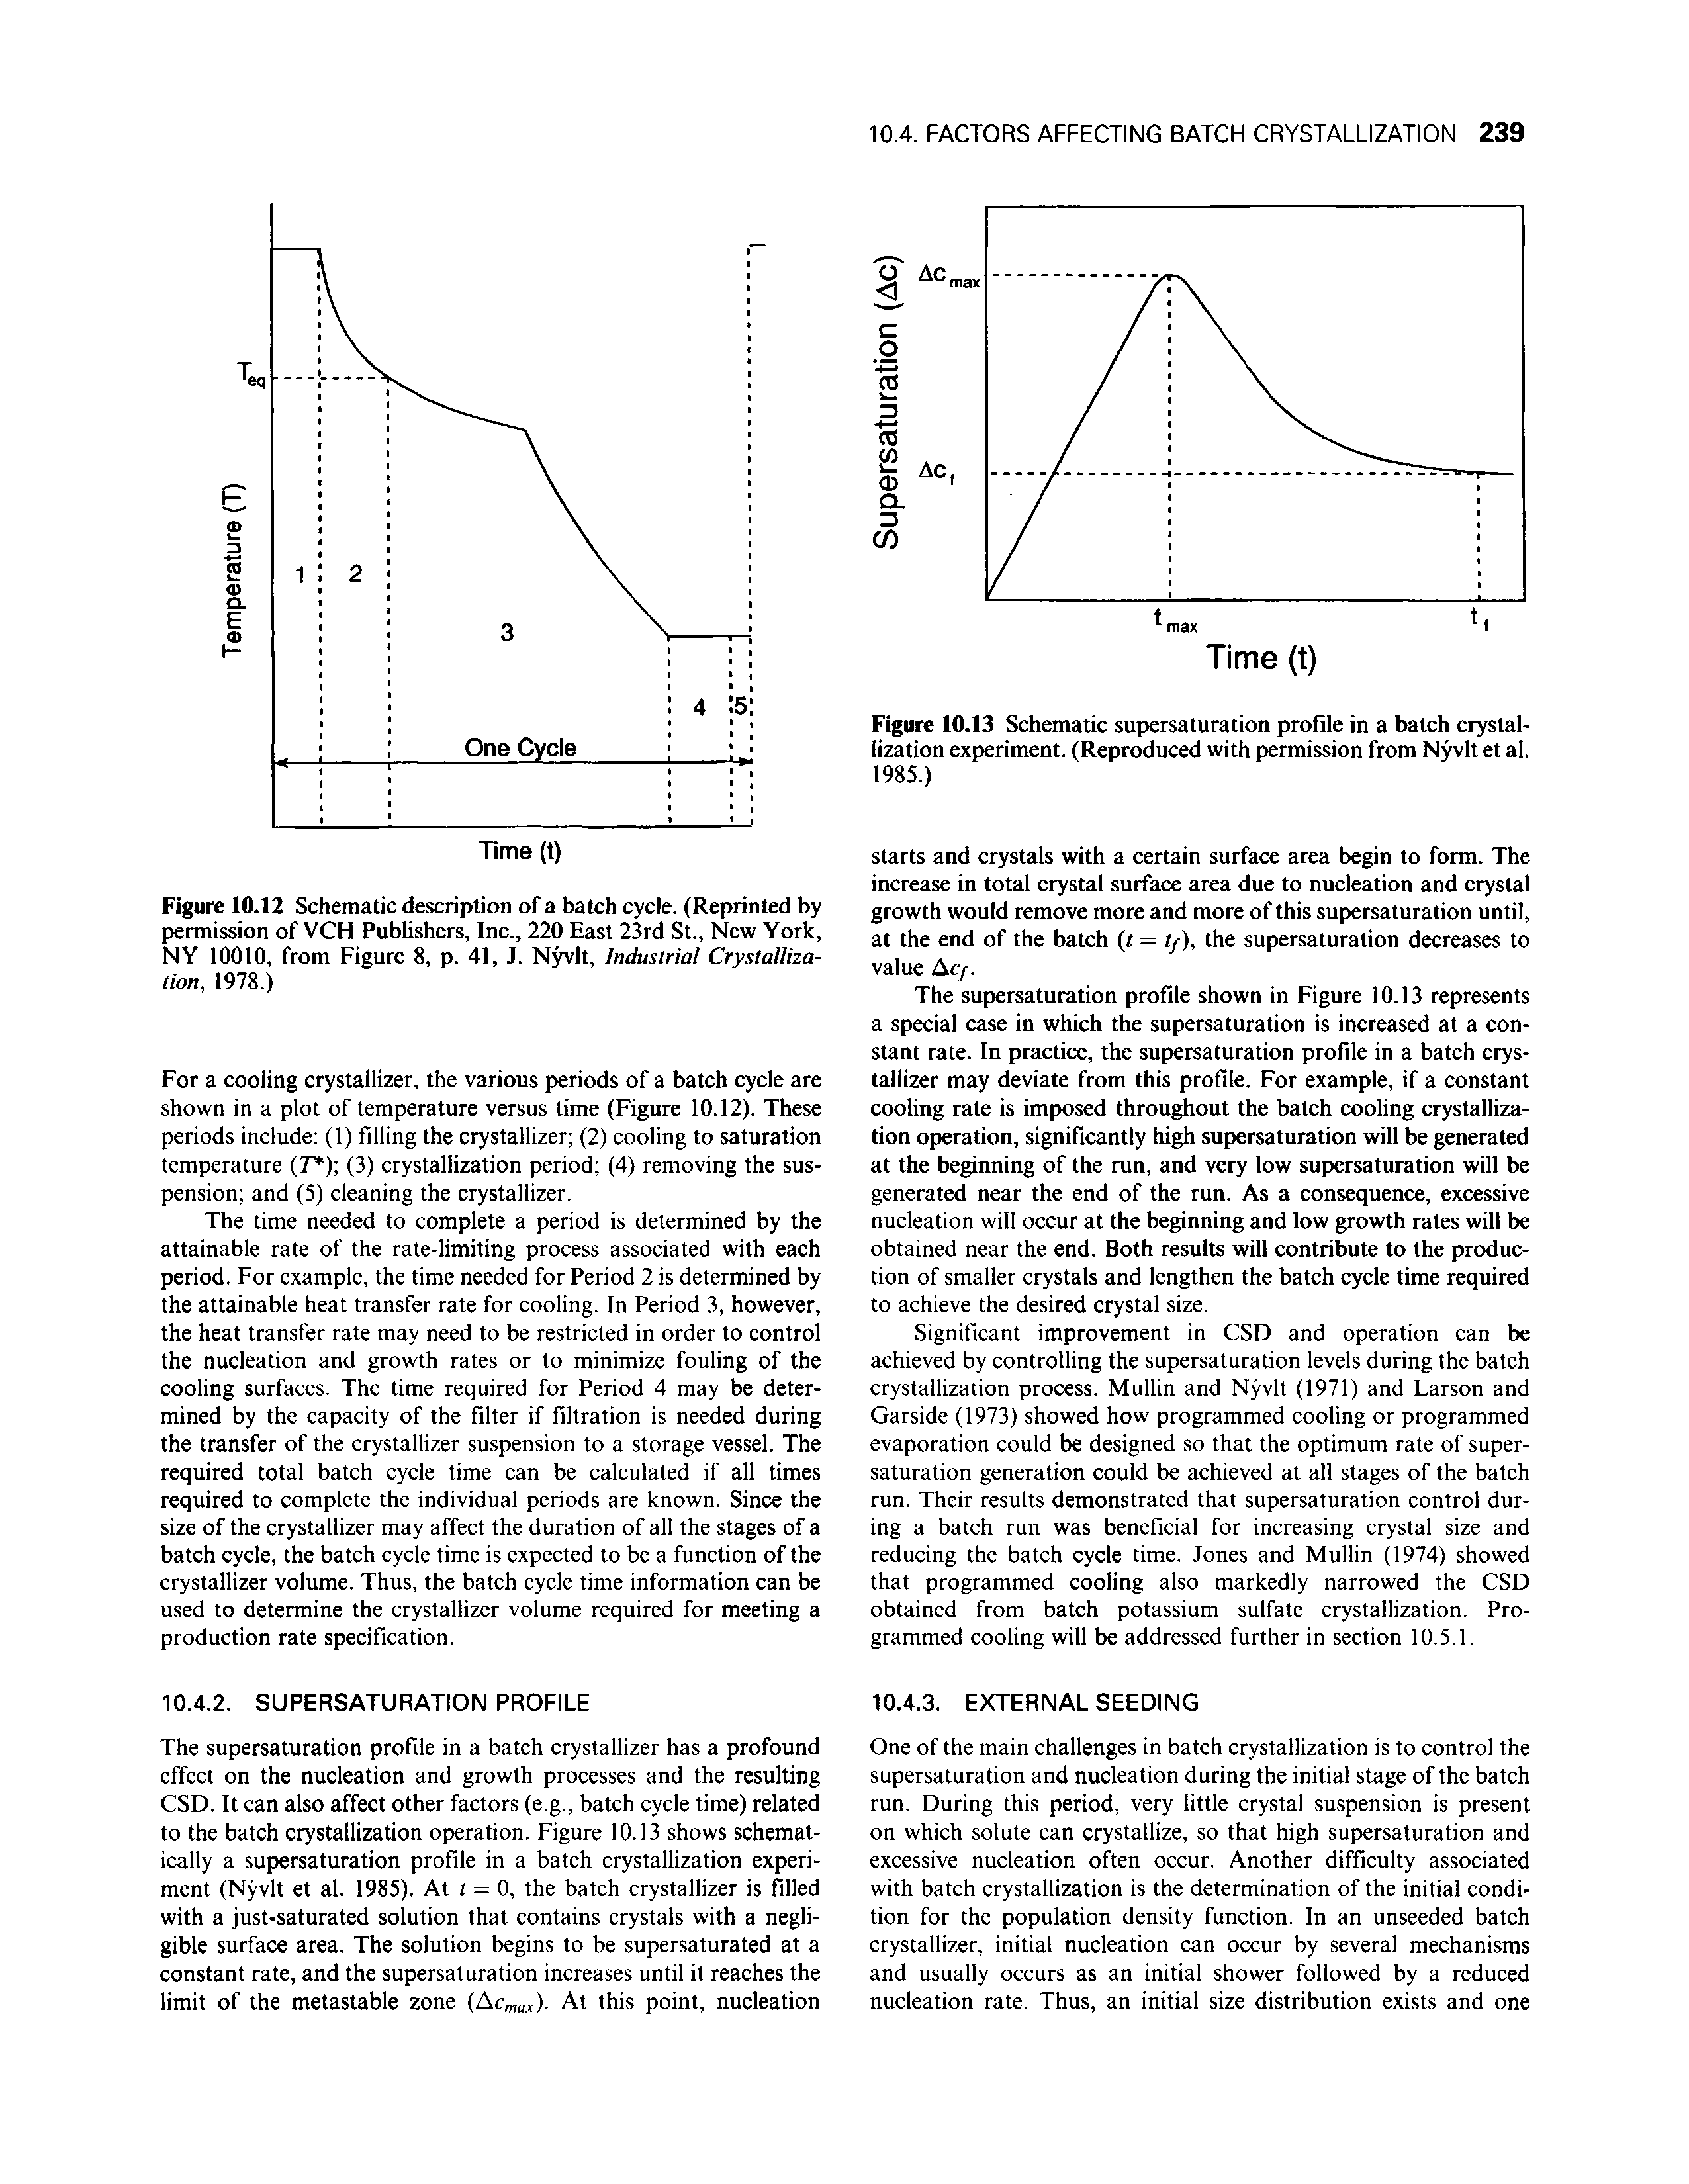 Figure 10.13 Schematic supersaturation profile in a batch crystallization experiment. (Reproduced with permission from Nyvlt et al. 1985.)...